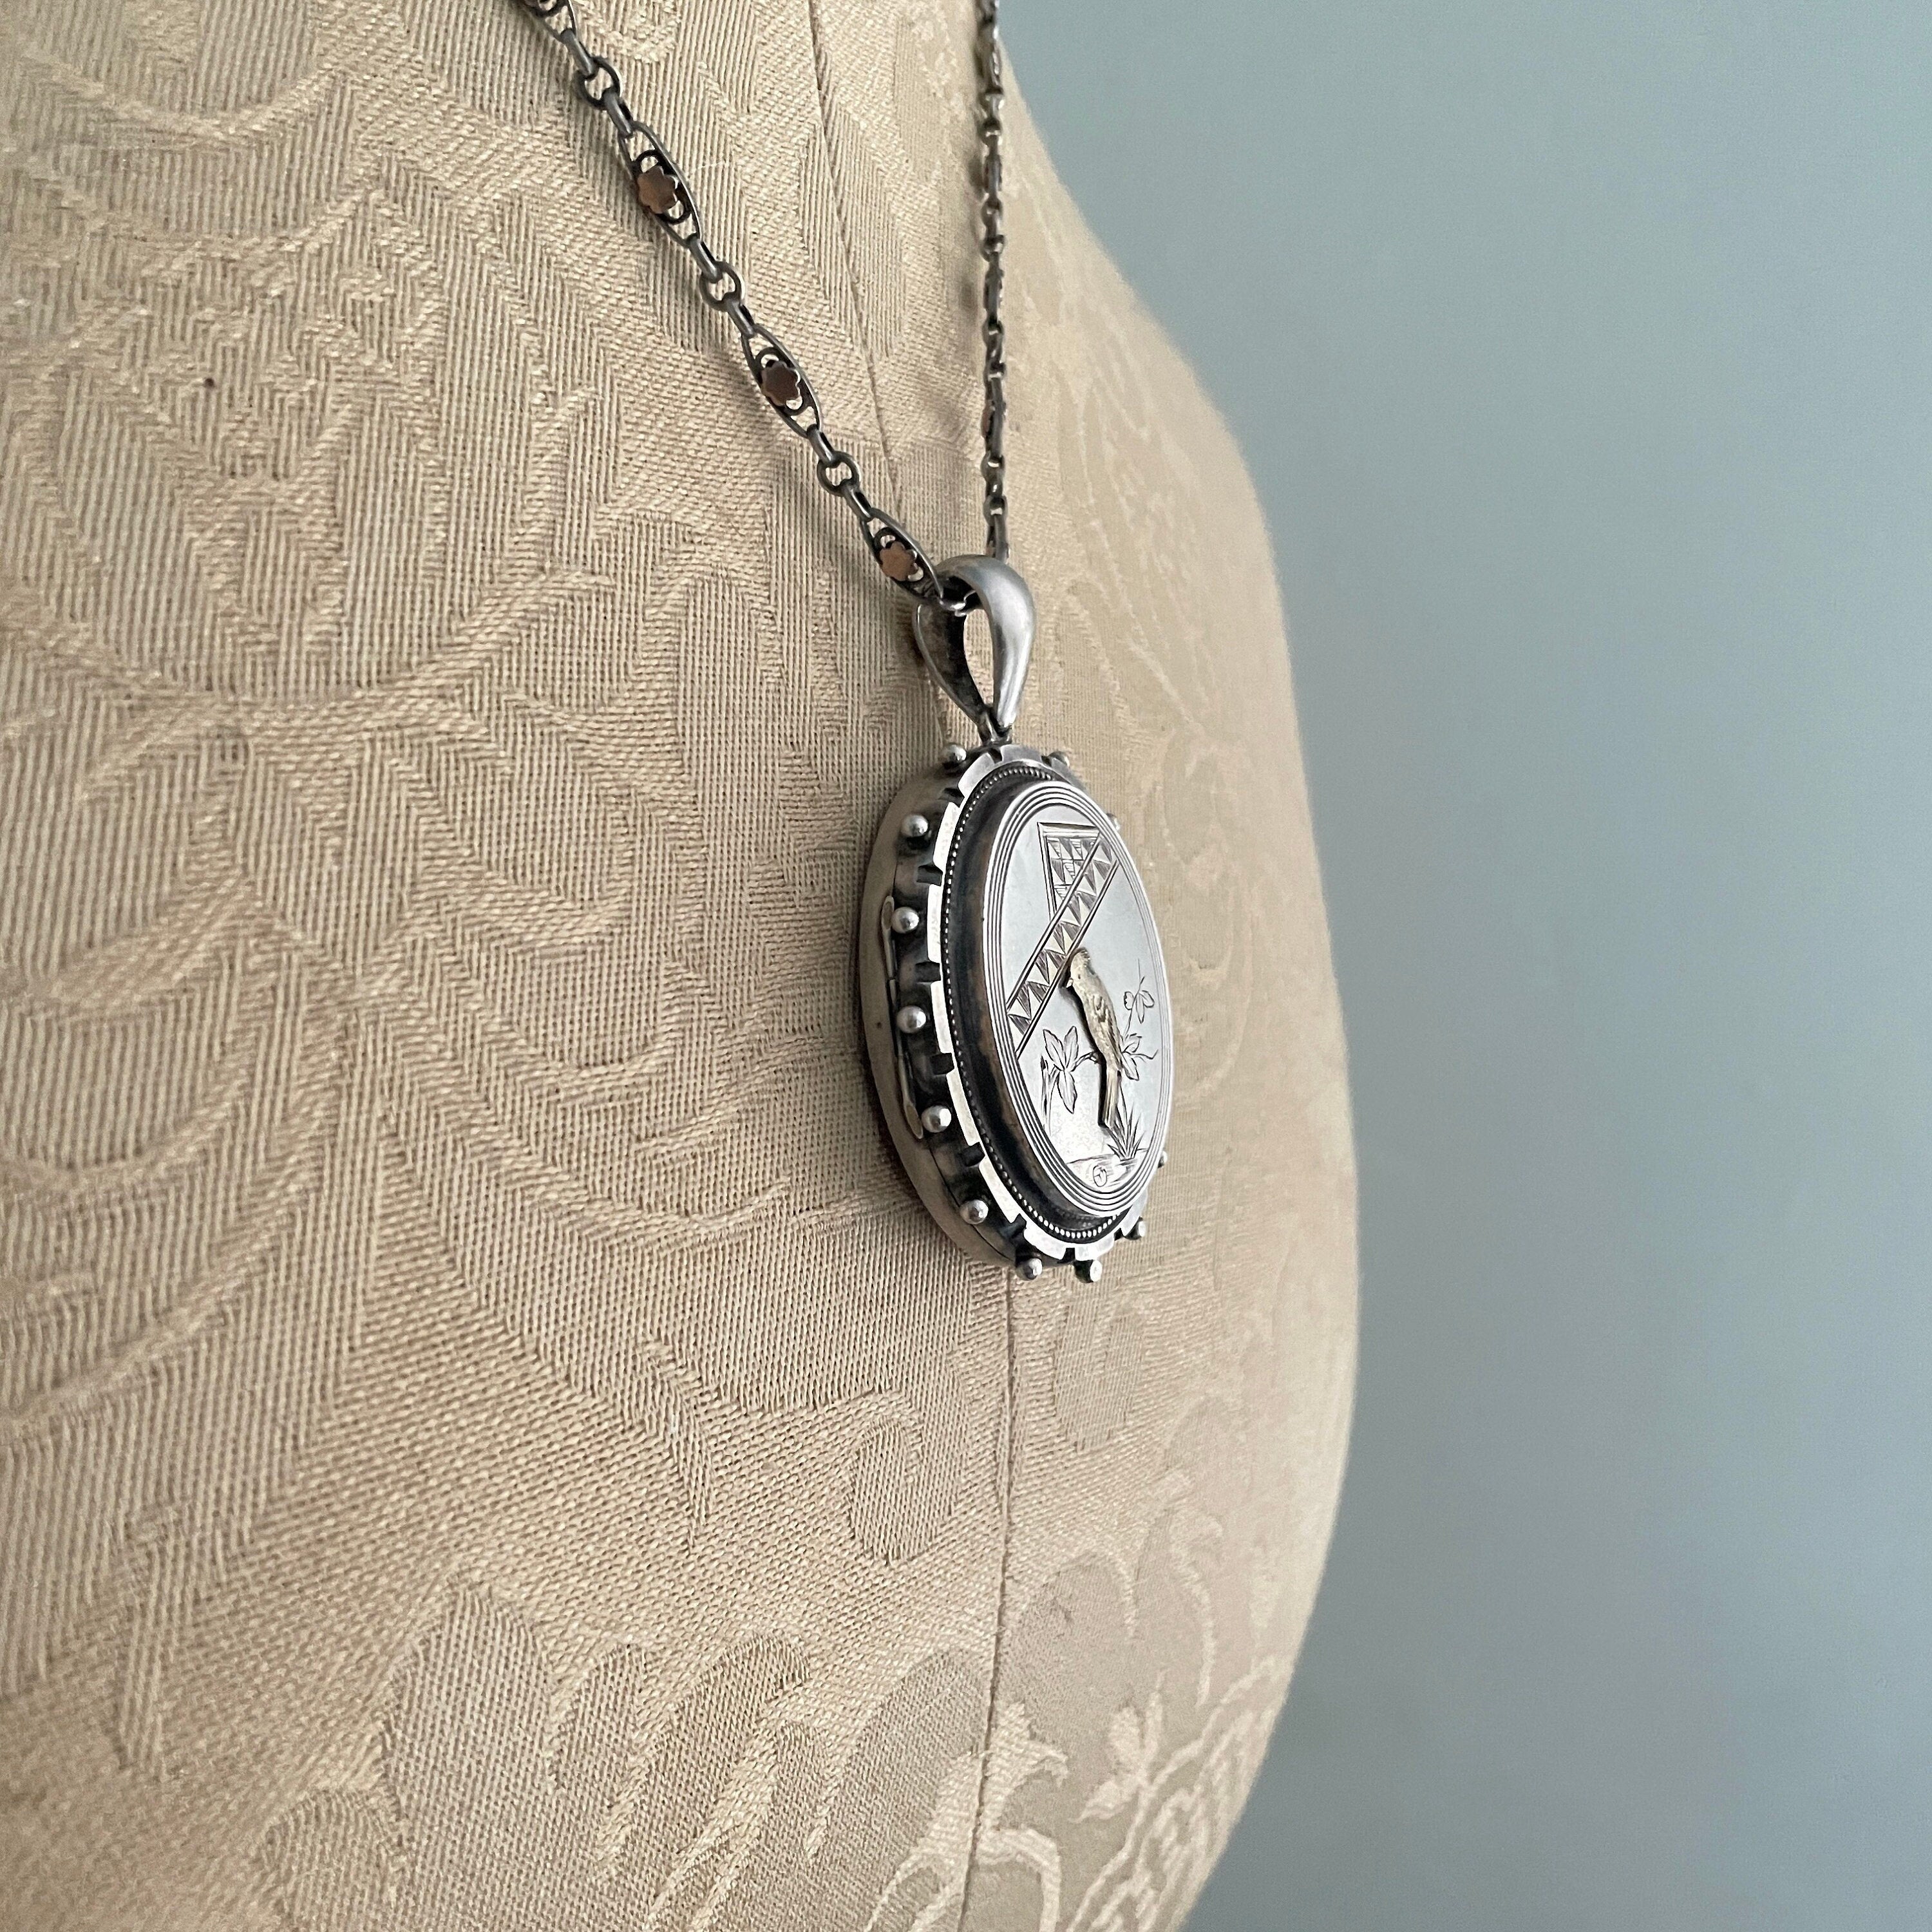 Victorian, Aesthetic Movement Large Sterling Silver Locket, With Bird Motif